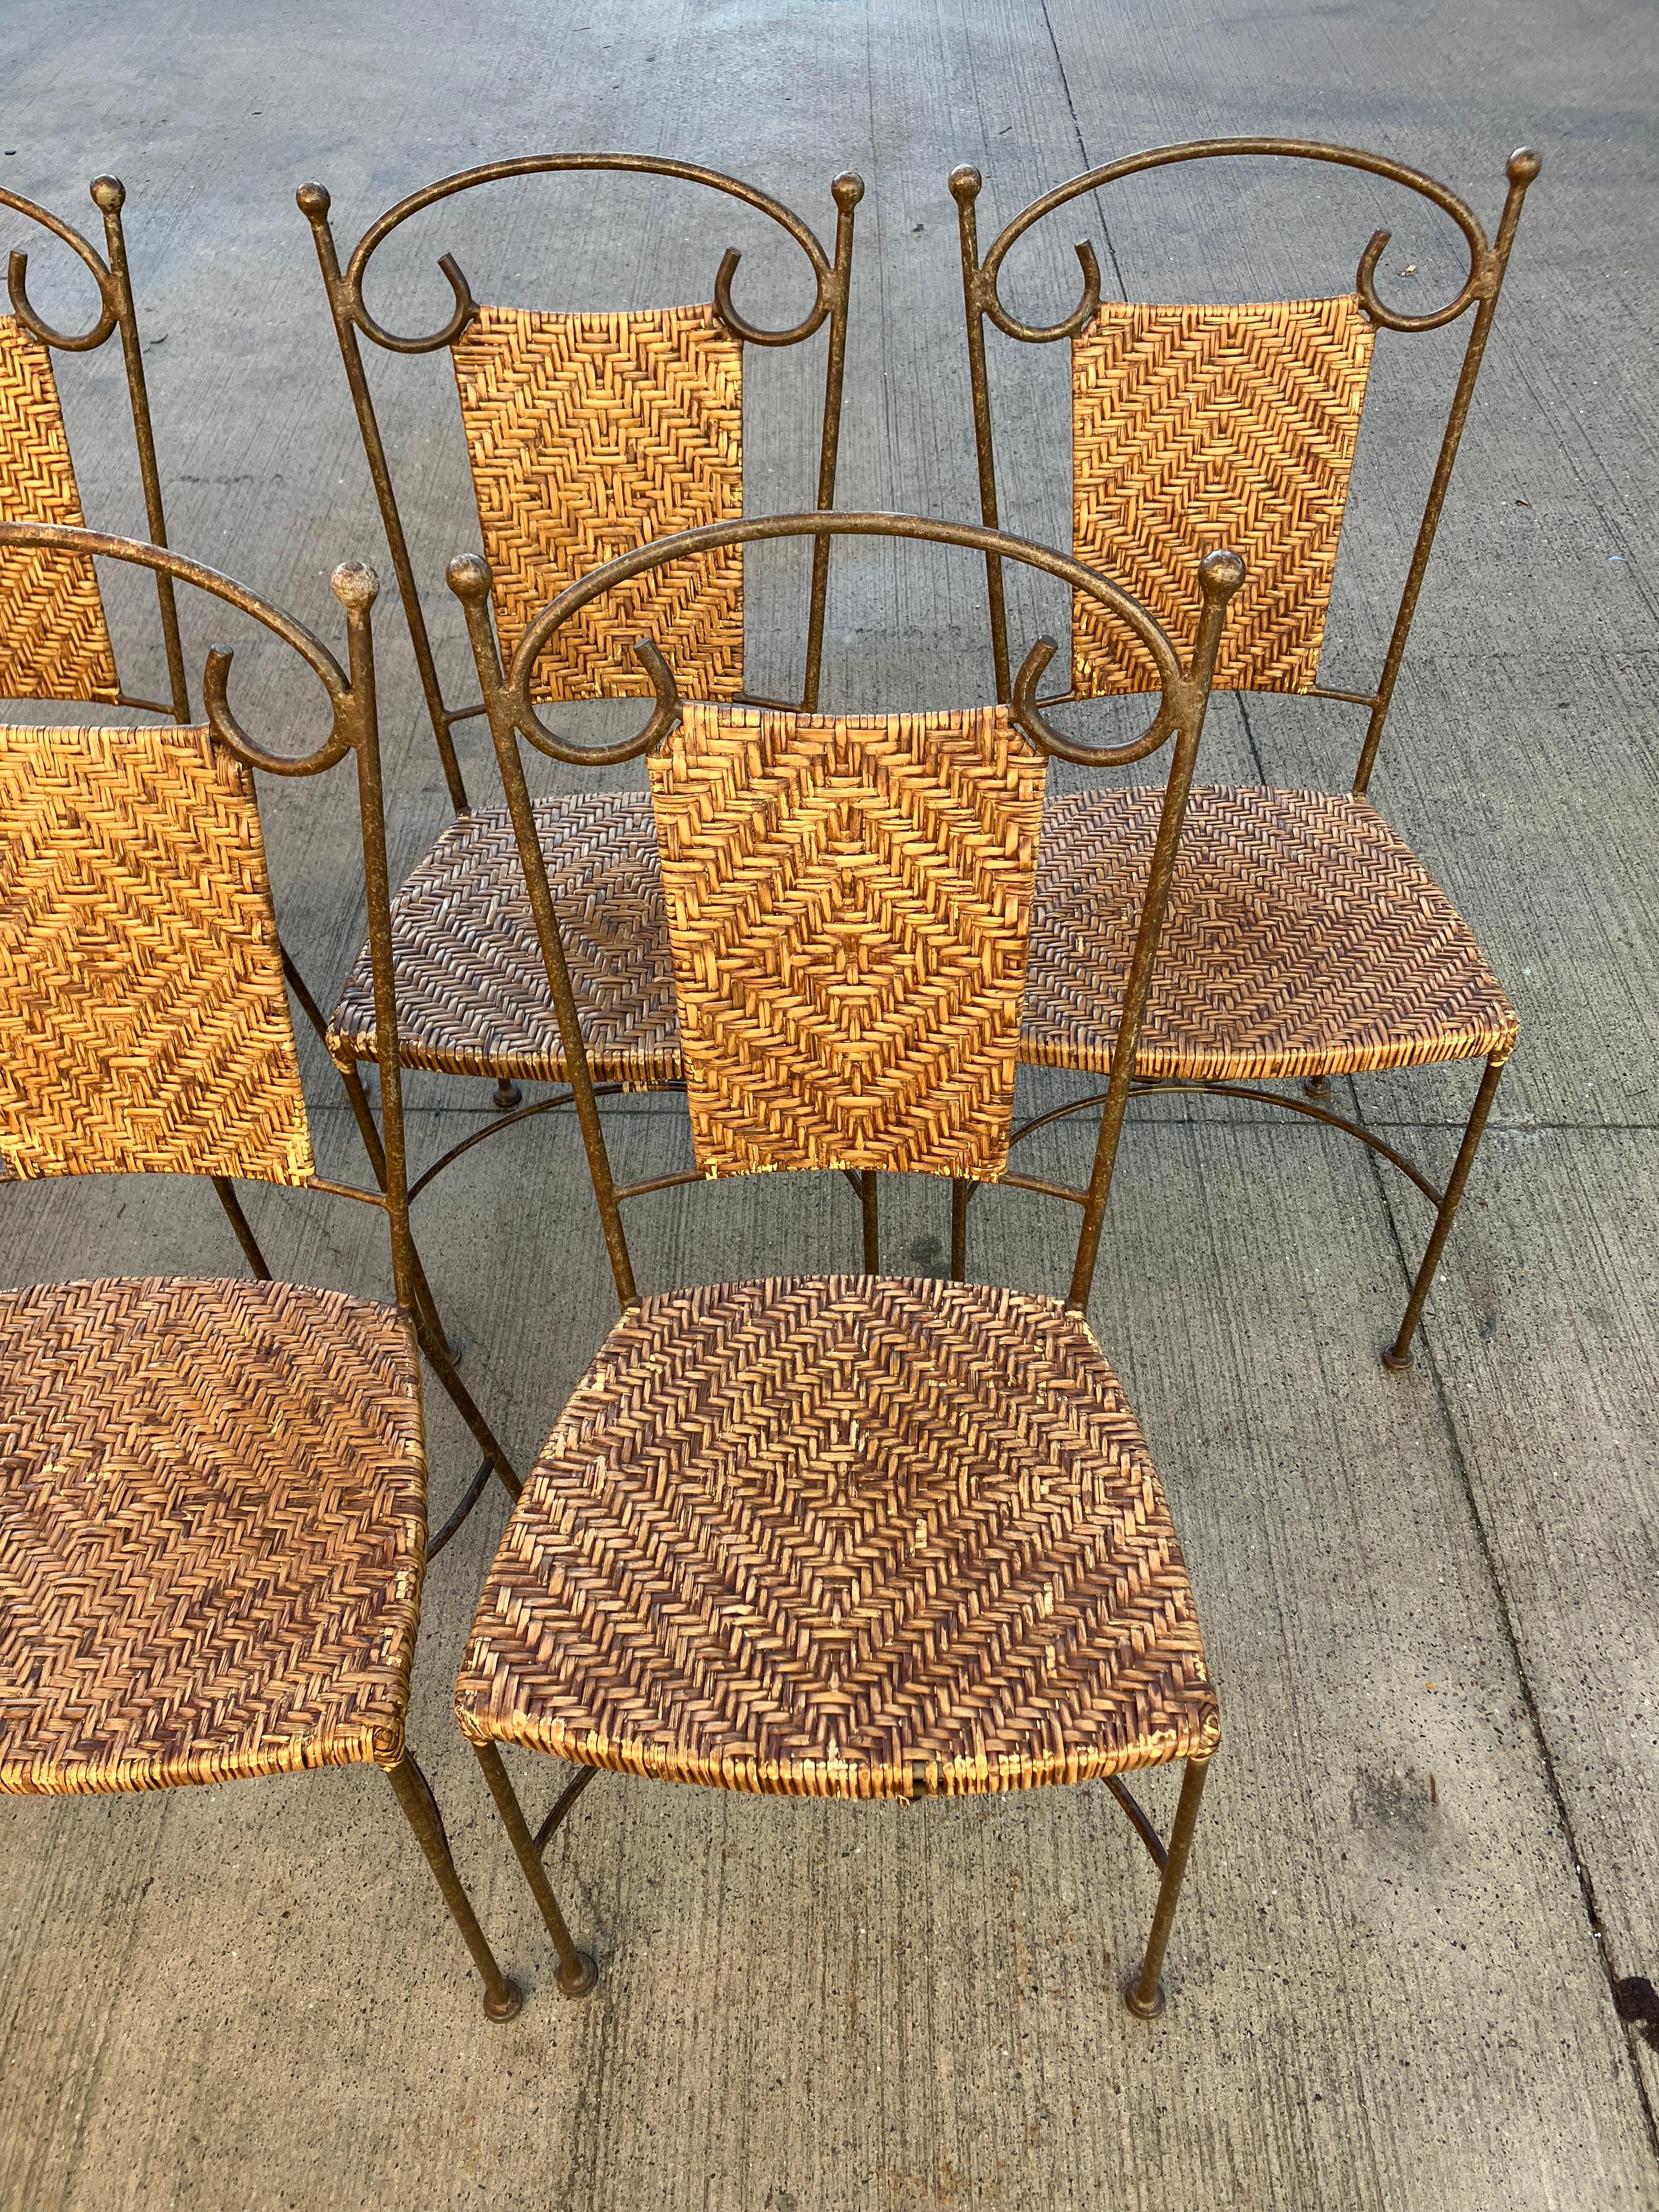 Vintage wrought Iron Dining Chairs with Wicker Seating x 6 For Sale 5